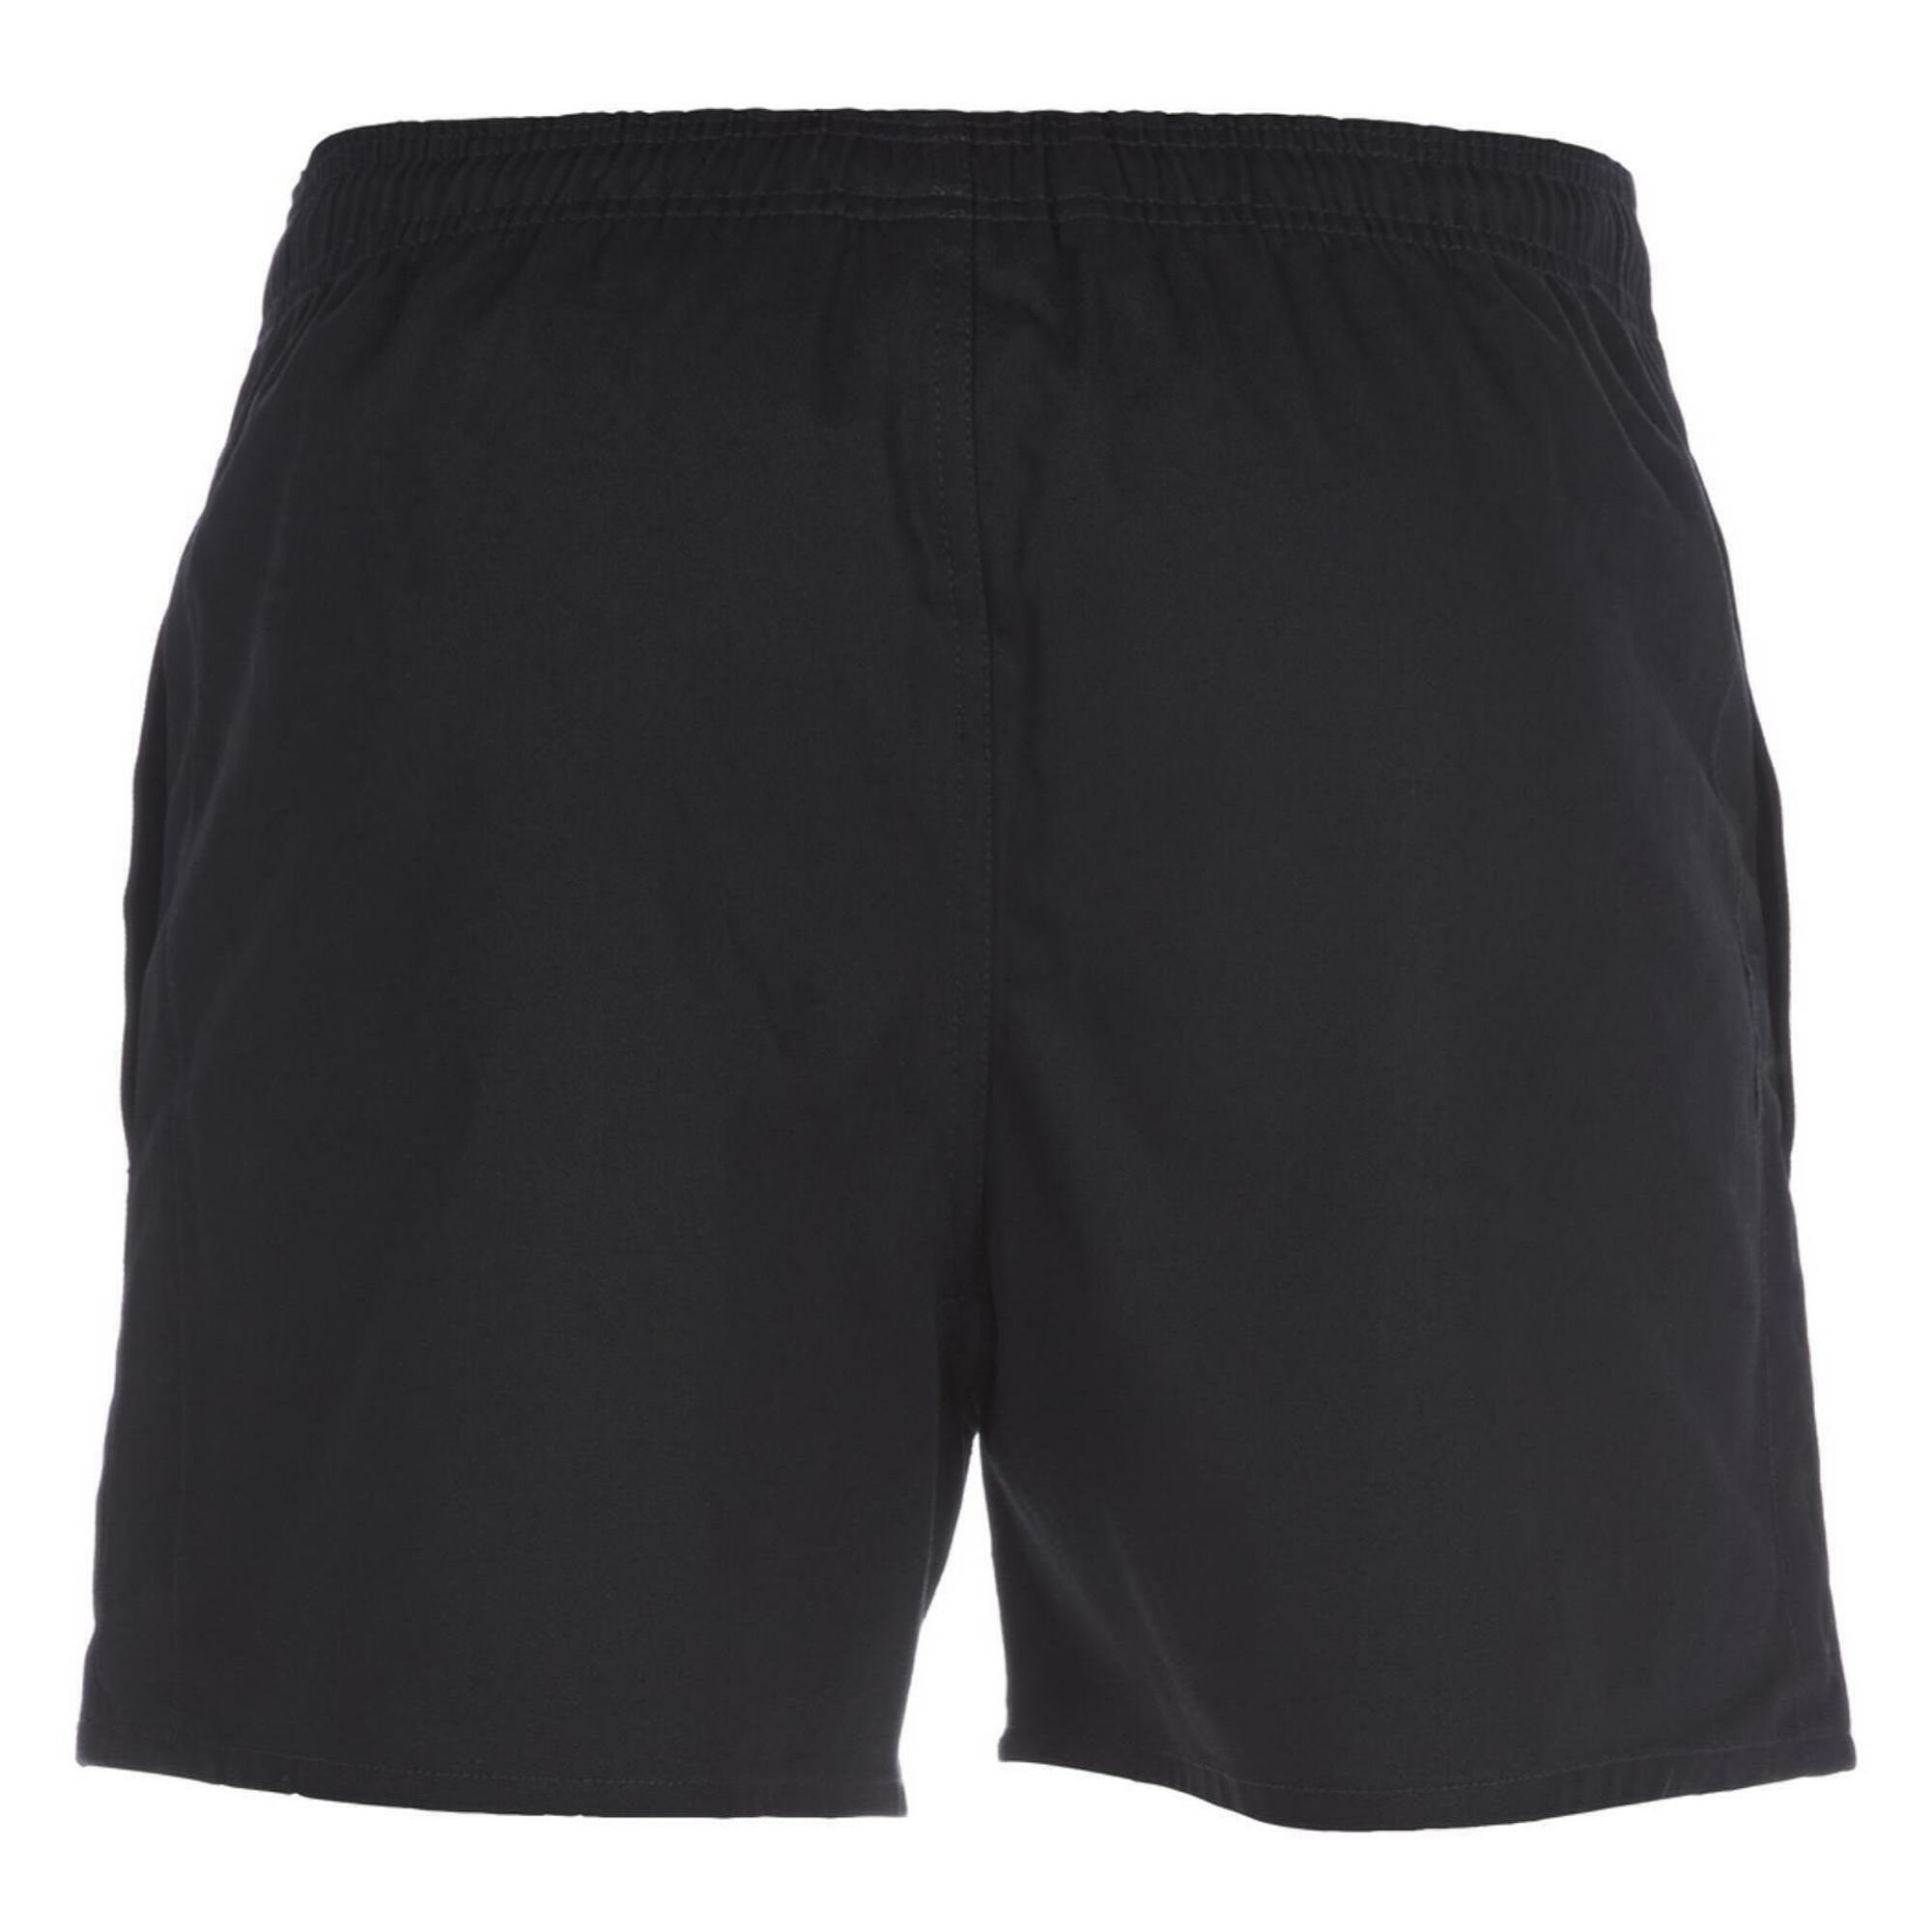 Mens Professional Cotton Rugby Shorts (Black) 2/4